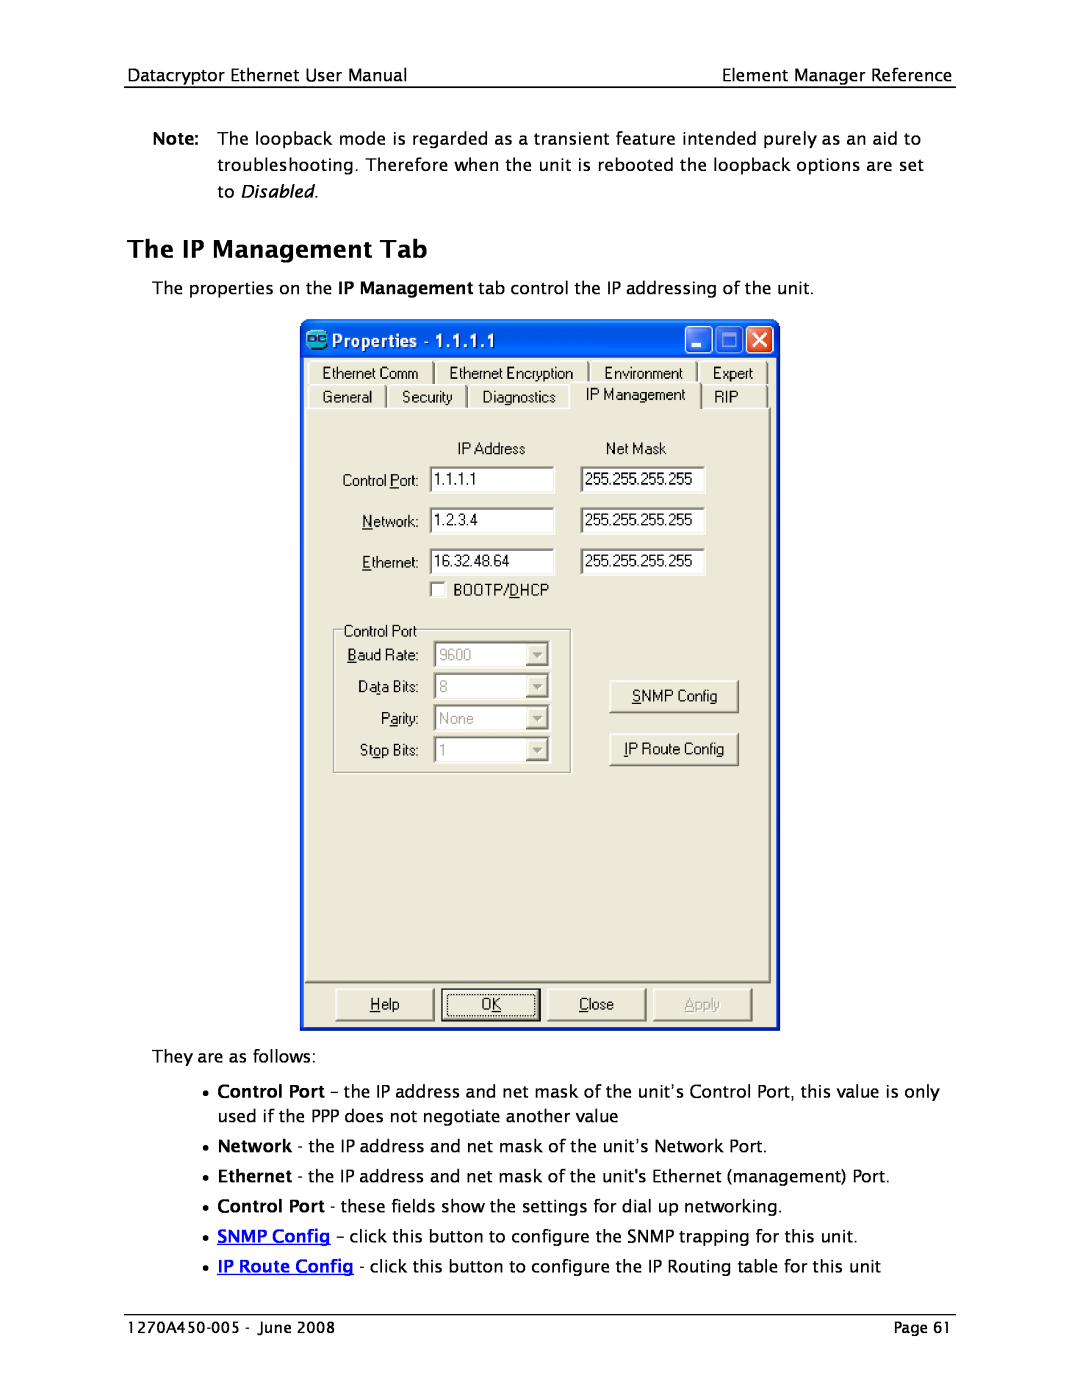 Angenieux 1270A450-005 user manual The IP Management Tab 